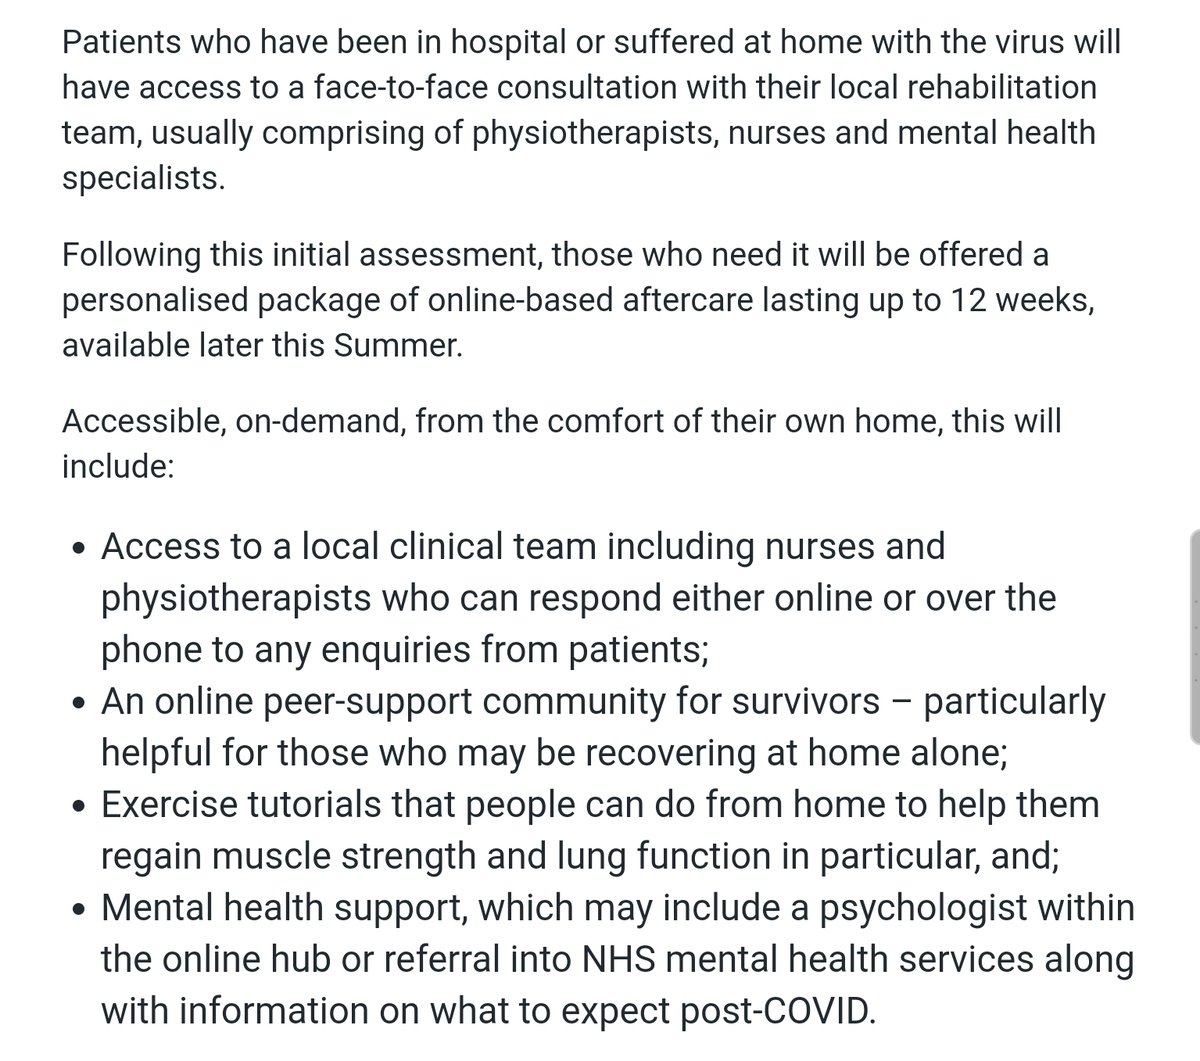 So the NHS is launching this new online rehab service for those living with long term effects of the virus. However, what is needed by many (including myself) is speedy access to specialists and diagnostic tests to rule out complications  https://www.england.nhs.uk/2020/07/nhs-to-launch-ground-breaking-online-covid-19-rehab-service/ 6/n